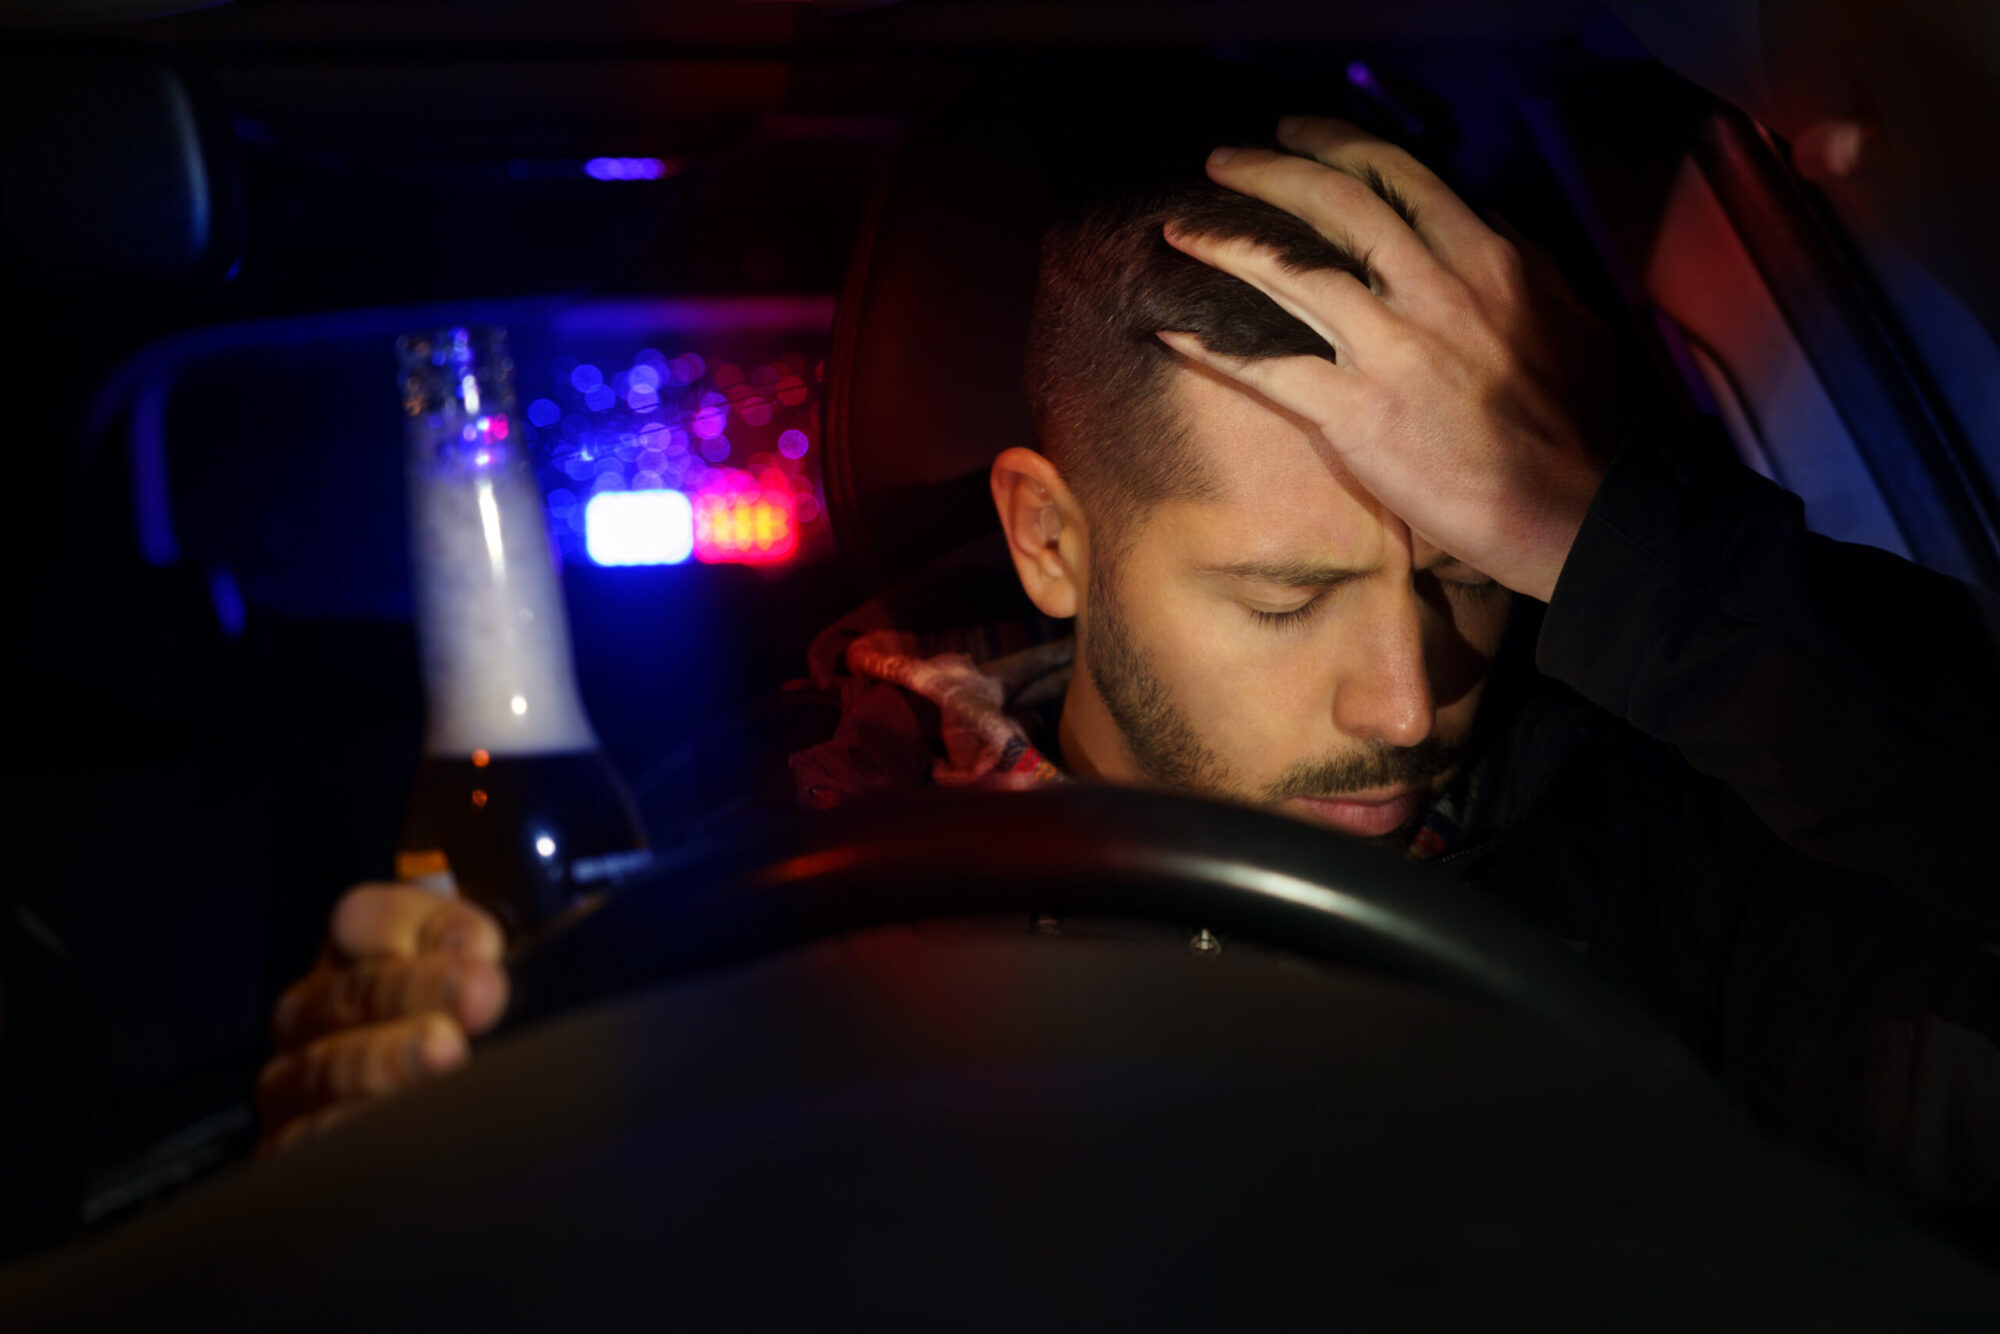 Road police with flashing lights stopped drunk driver. Young man drinking beer while driving car. Driver under alcohol influence. High quality photo